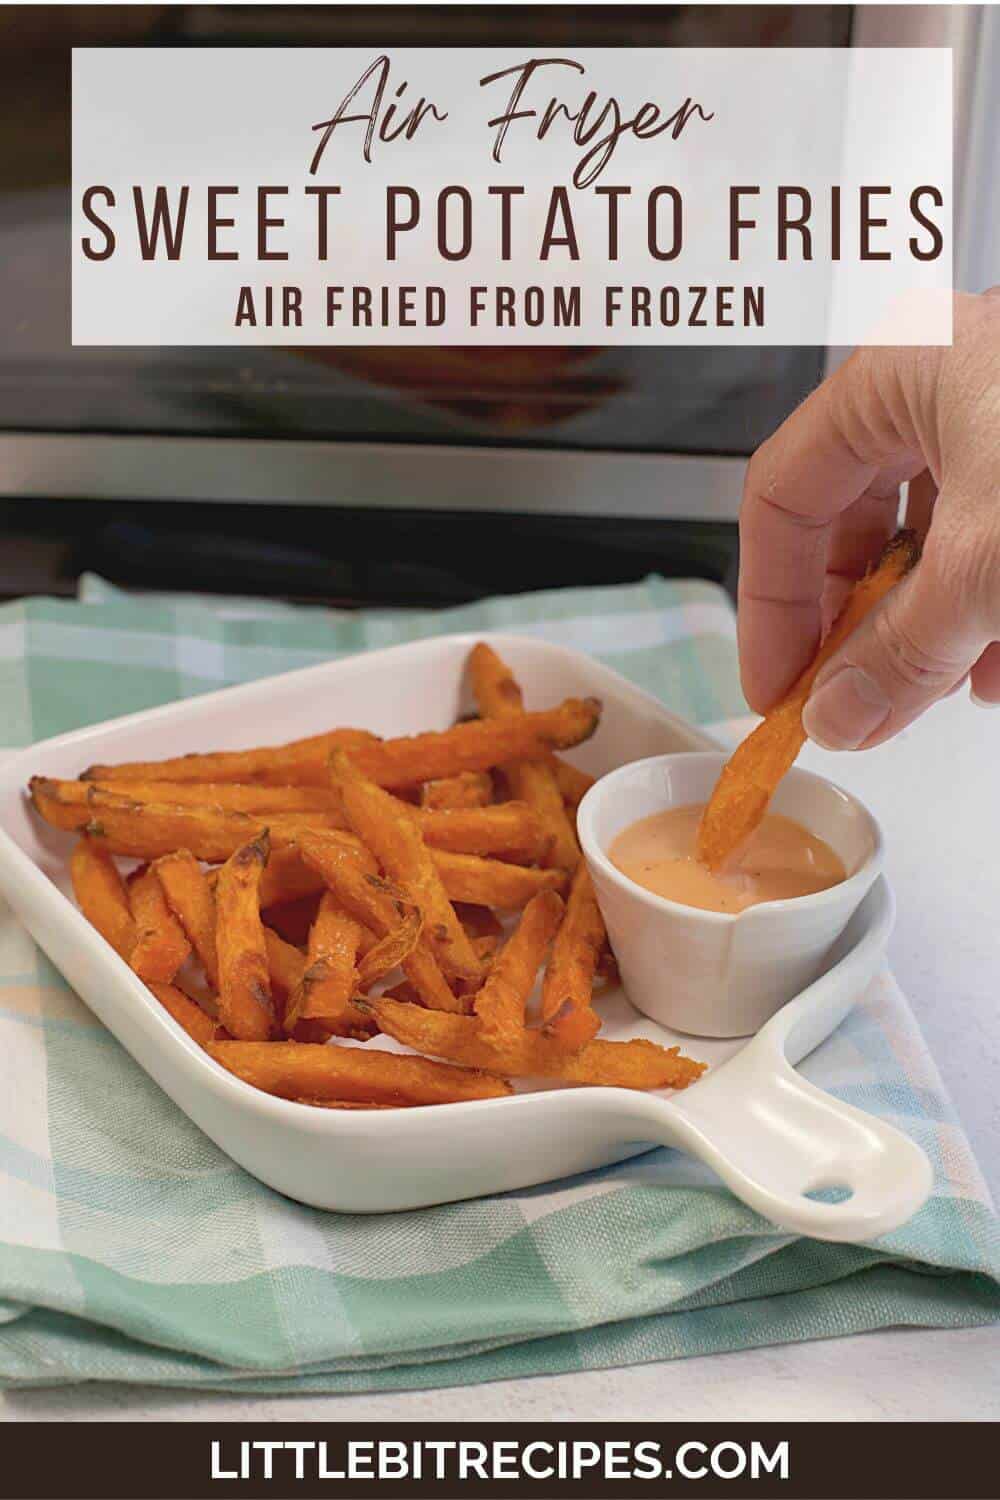 air fryer sweet potato fries with text.